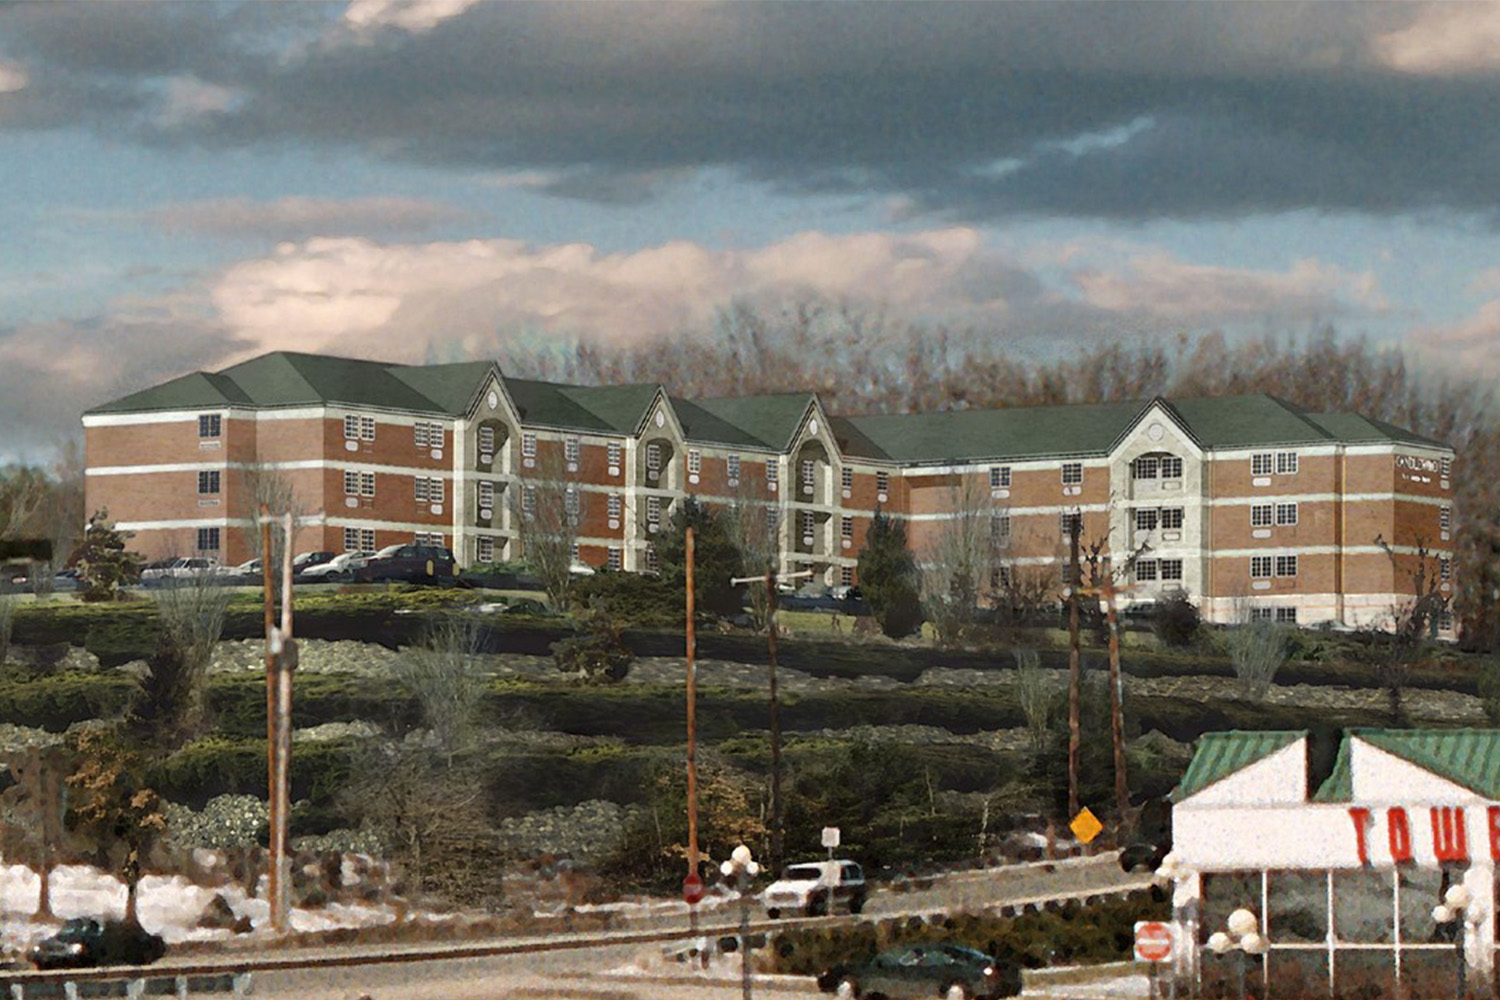 View of Candlewood Suites seen from a large distance 